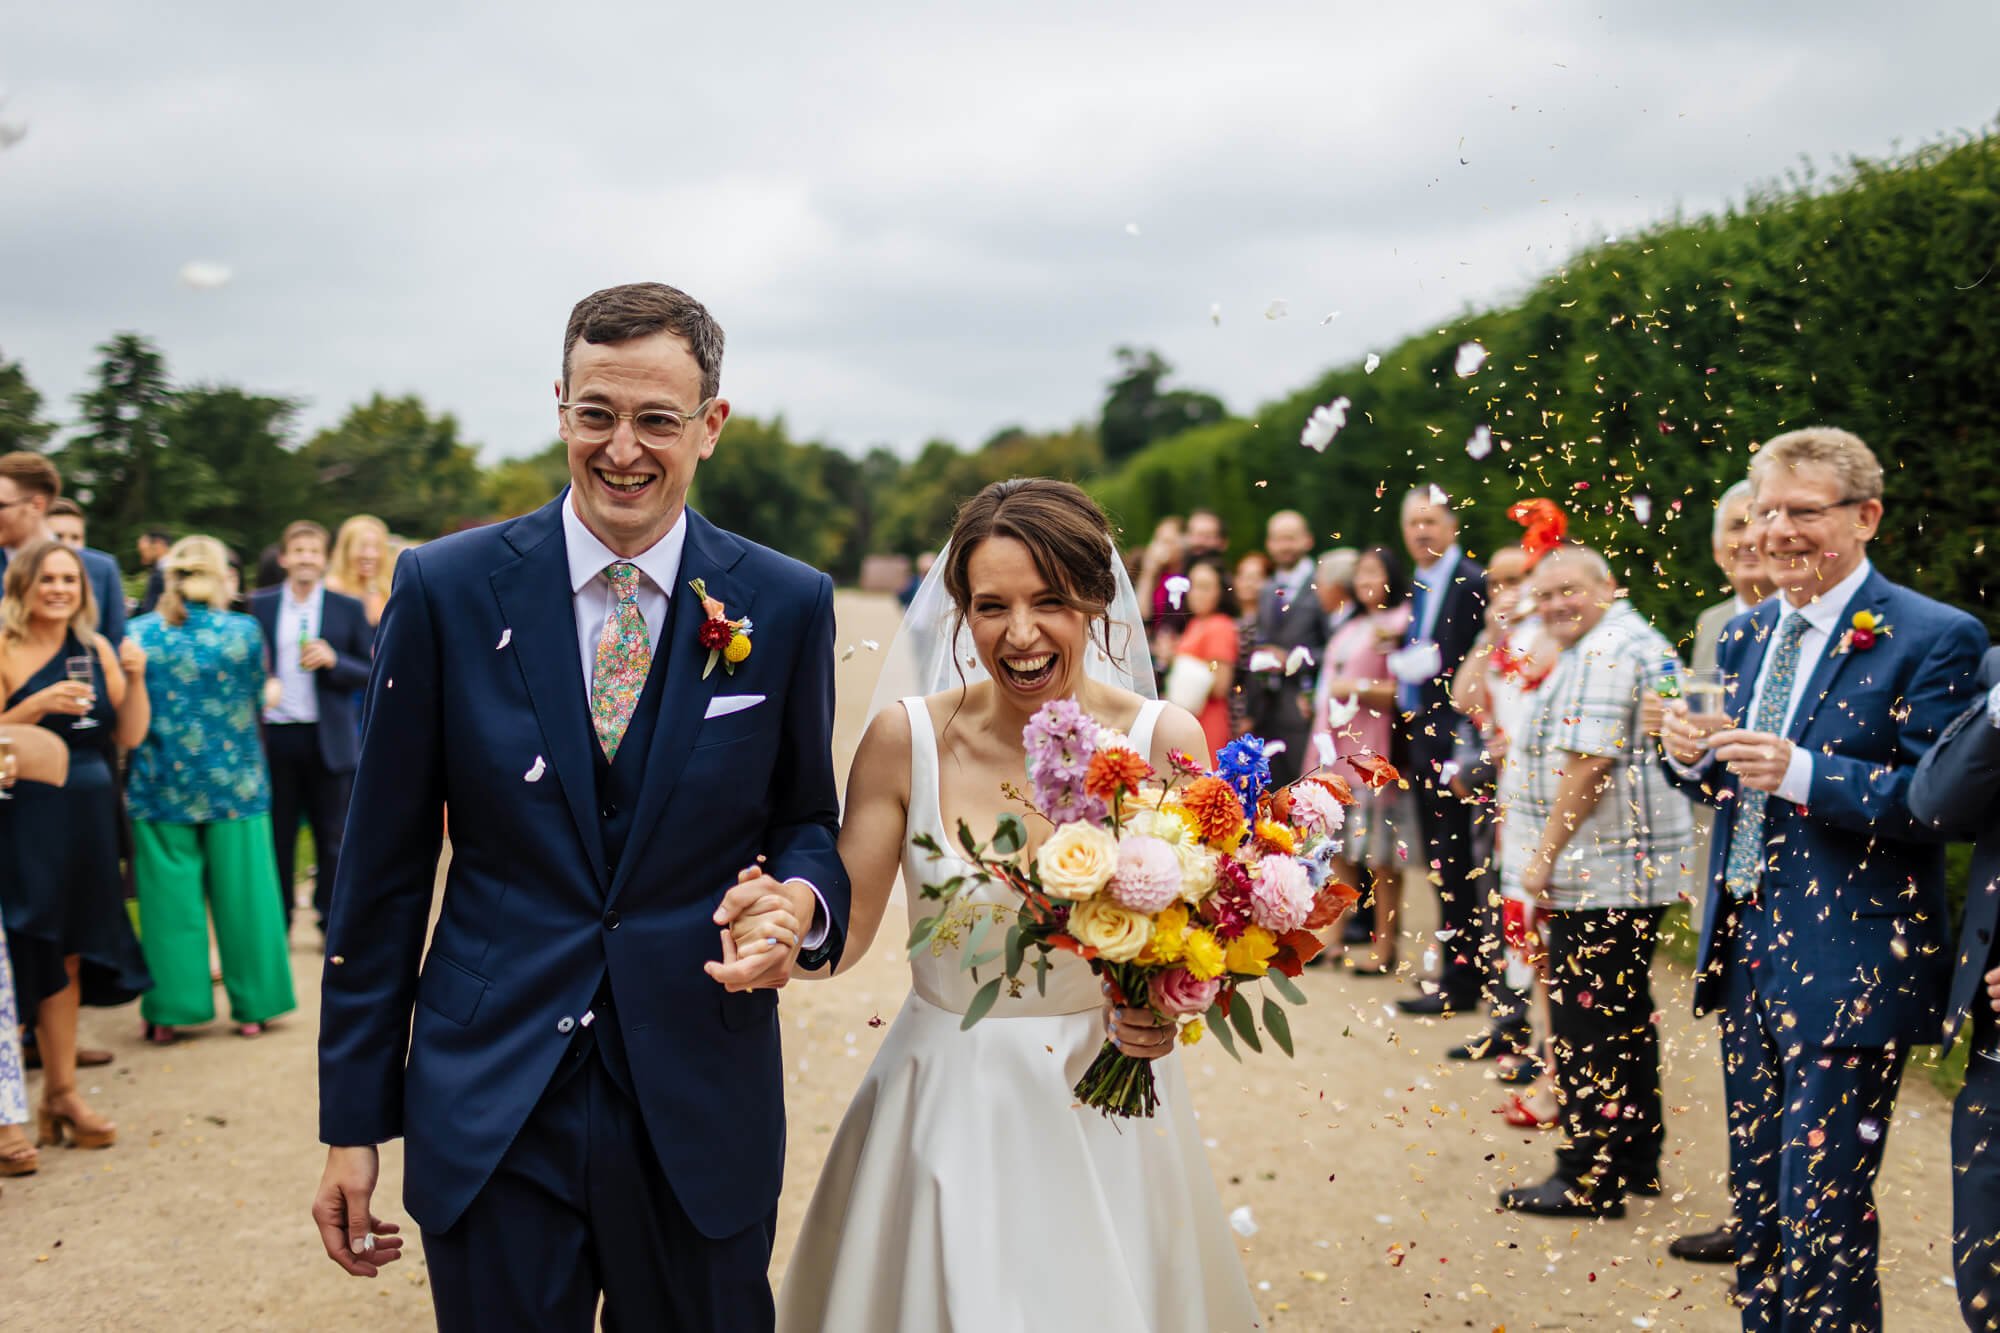 Throwing confetti over the couple at a Yorkshire Sculpture Park wedding